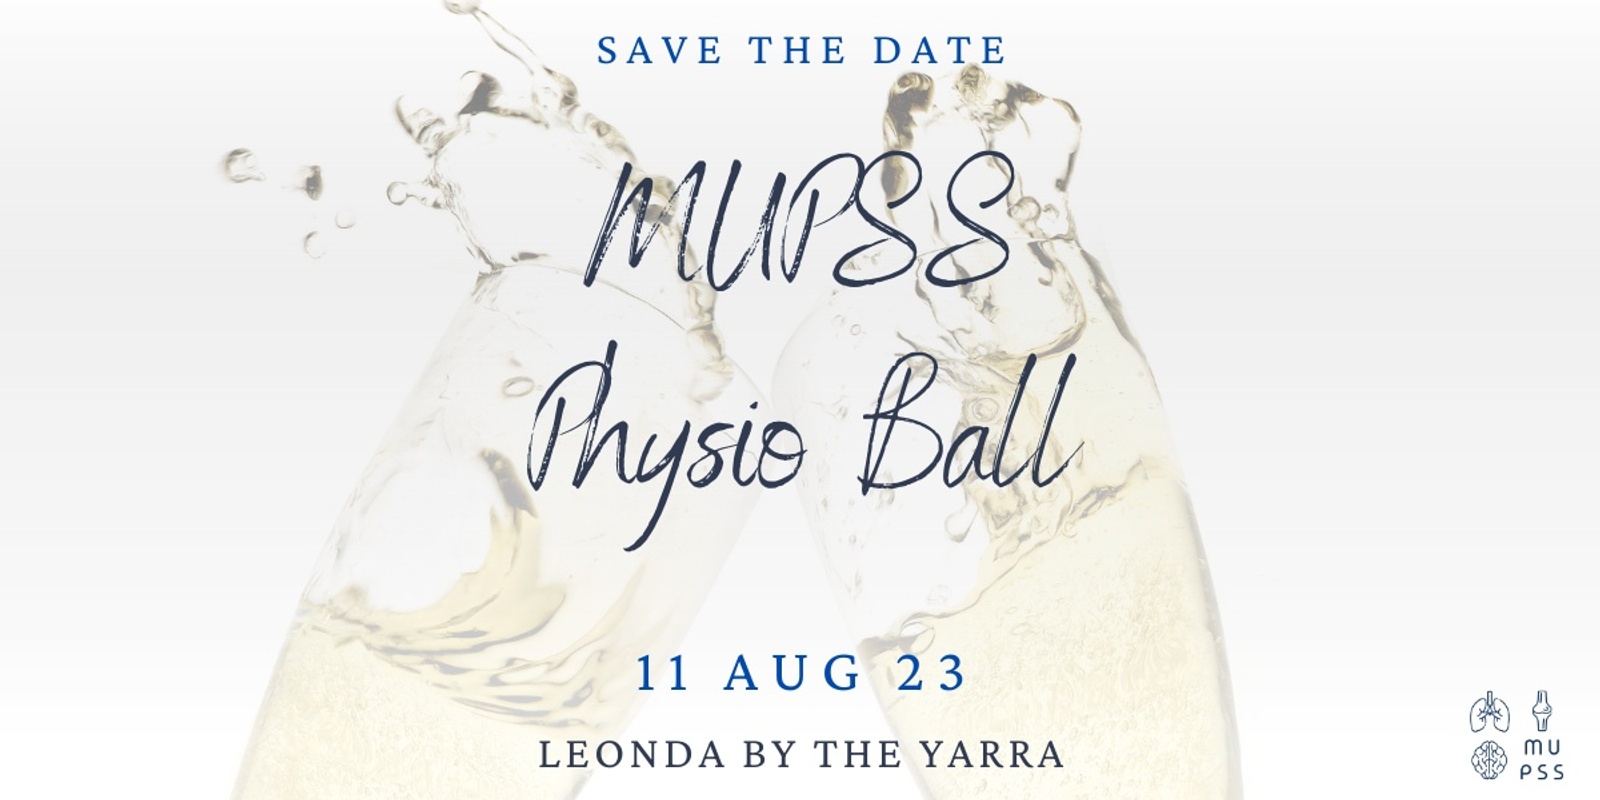 Banner image for MUPSS Physiotherapy Ball 2023